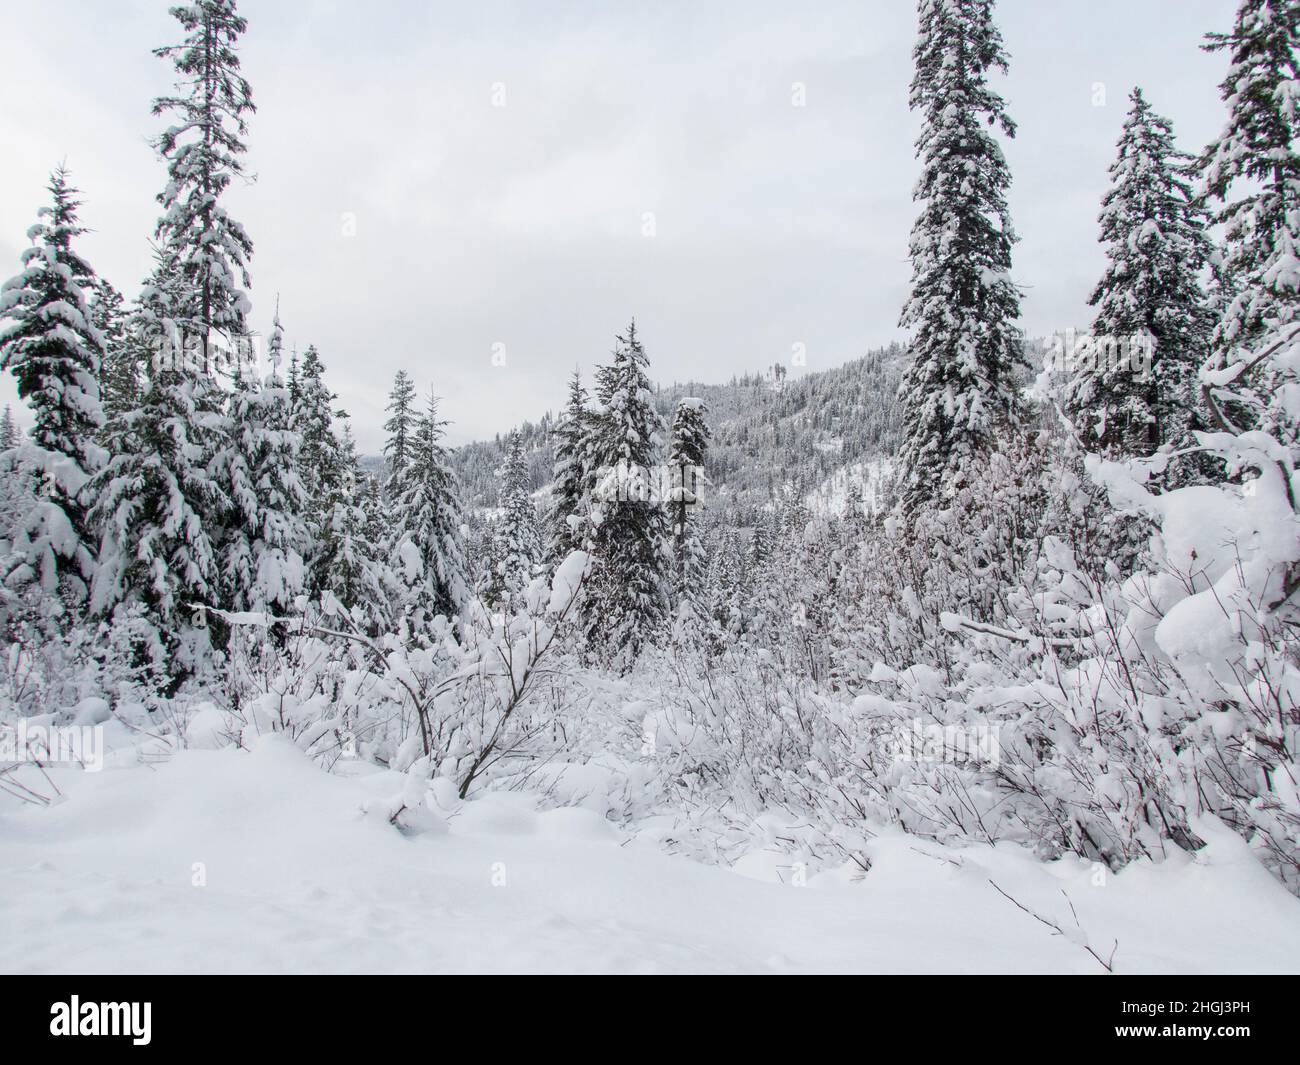 View of the snowy winter forest along highway 207 near Leavenworth in eastern Washington State, USA. Stock Photo